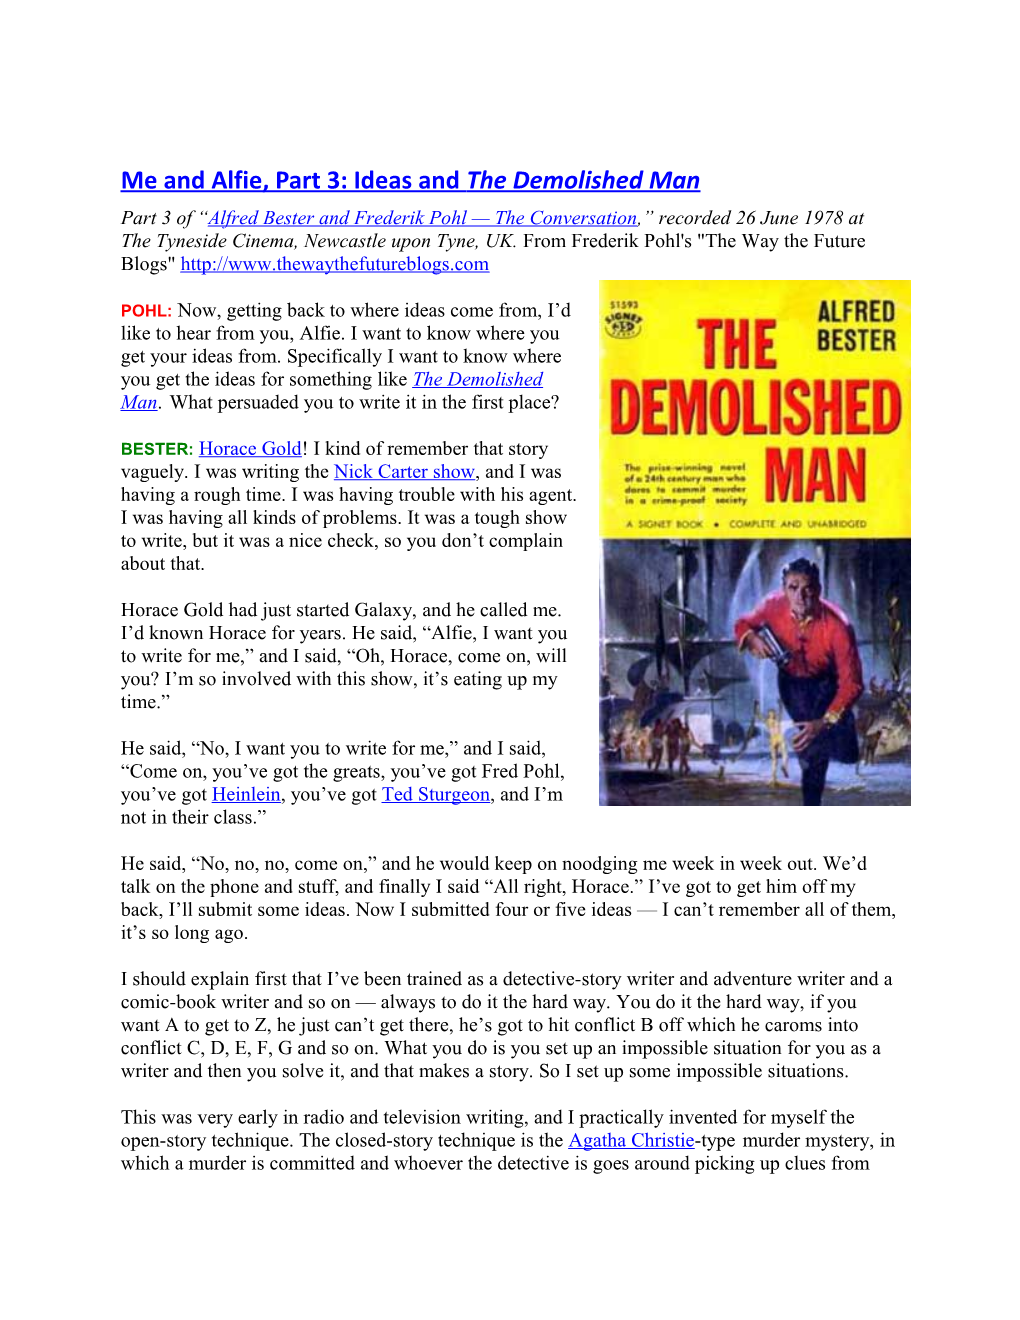 Me and Alfie, Part 3: Ideas and the Demolished Man